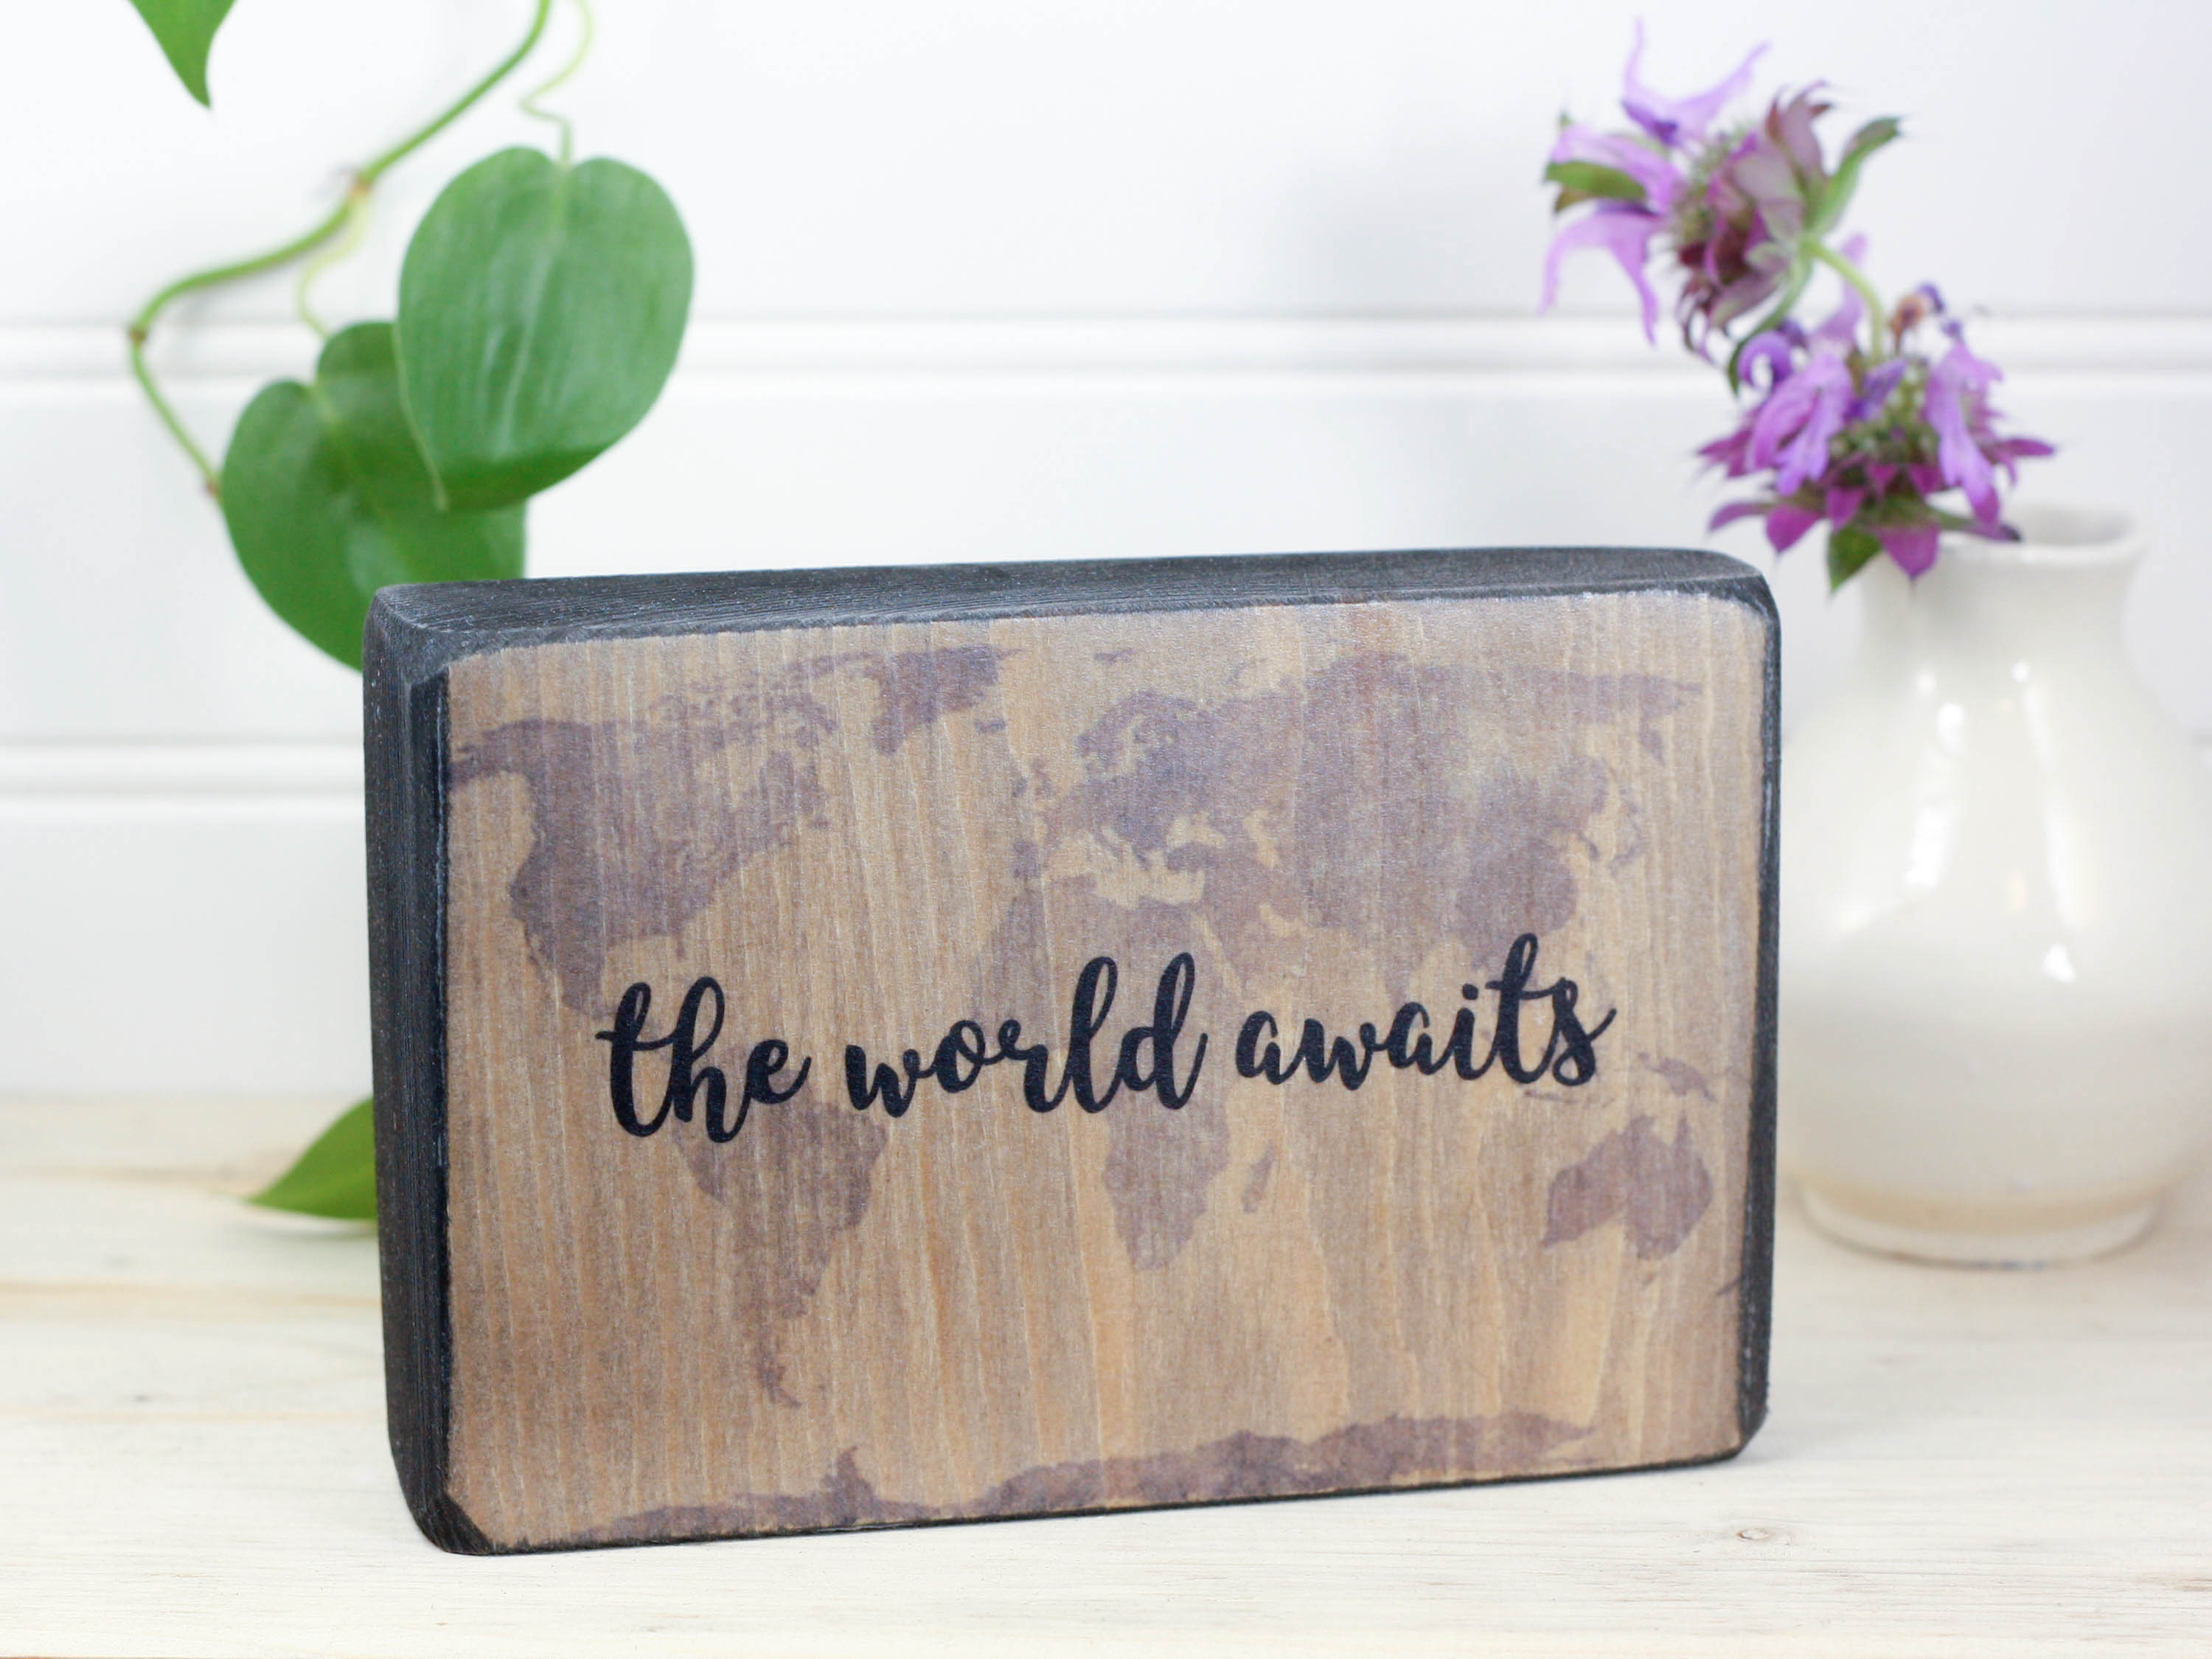 Small wood quote block in distressed black with the saying "The world awaits".